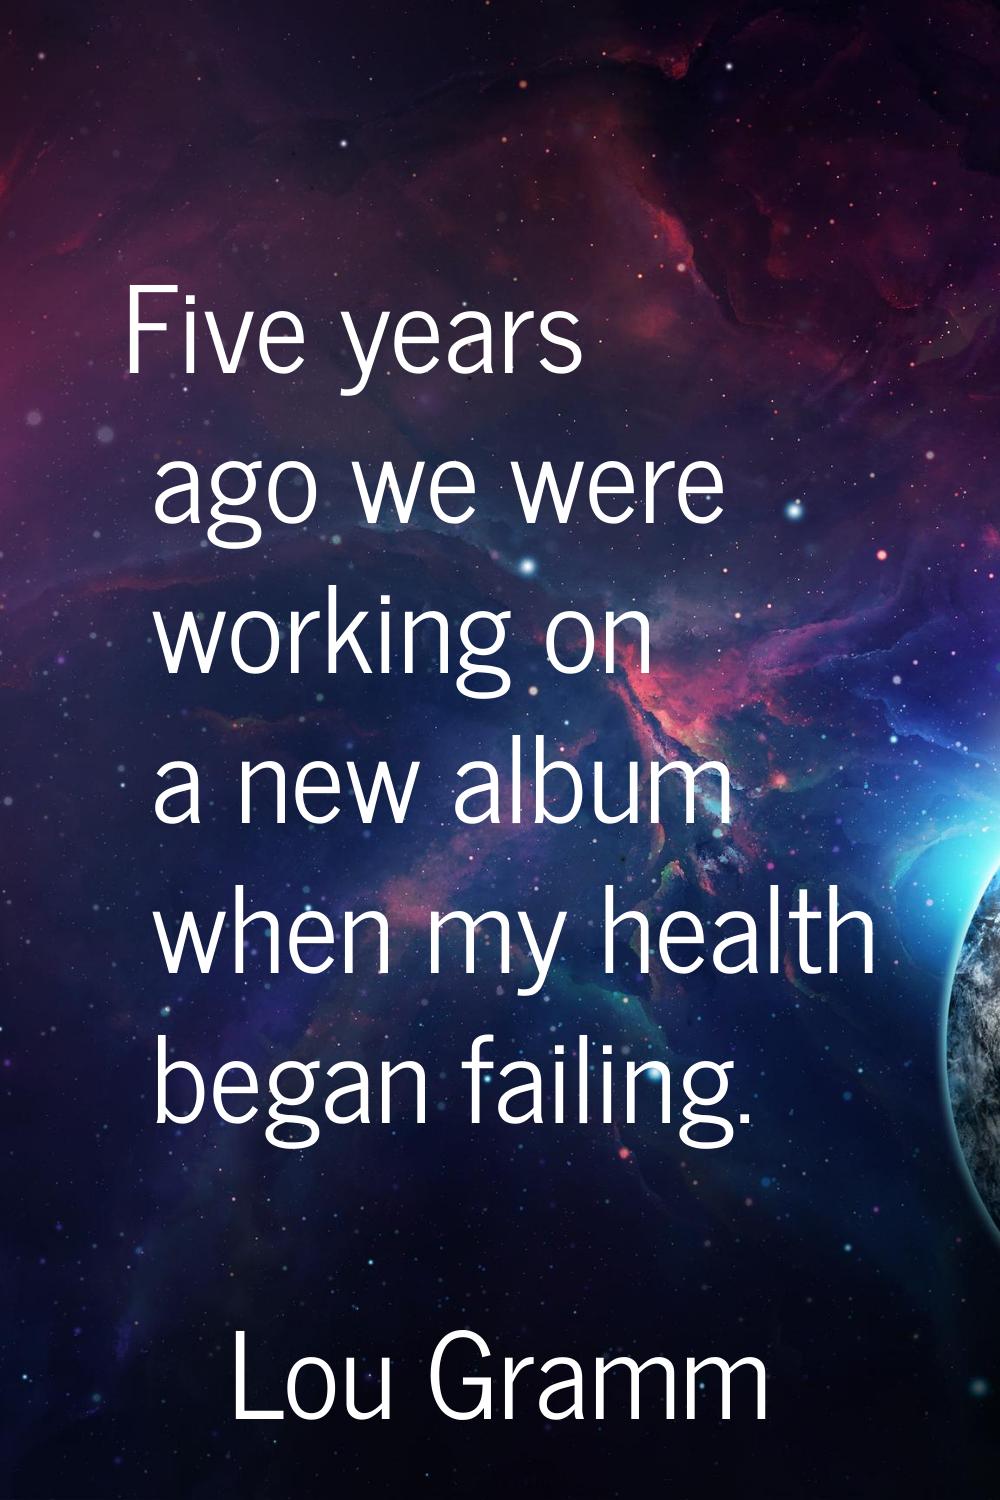 Five years ago we were working on a new album when my health began failing.